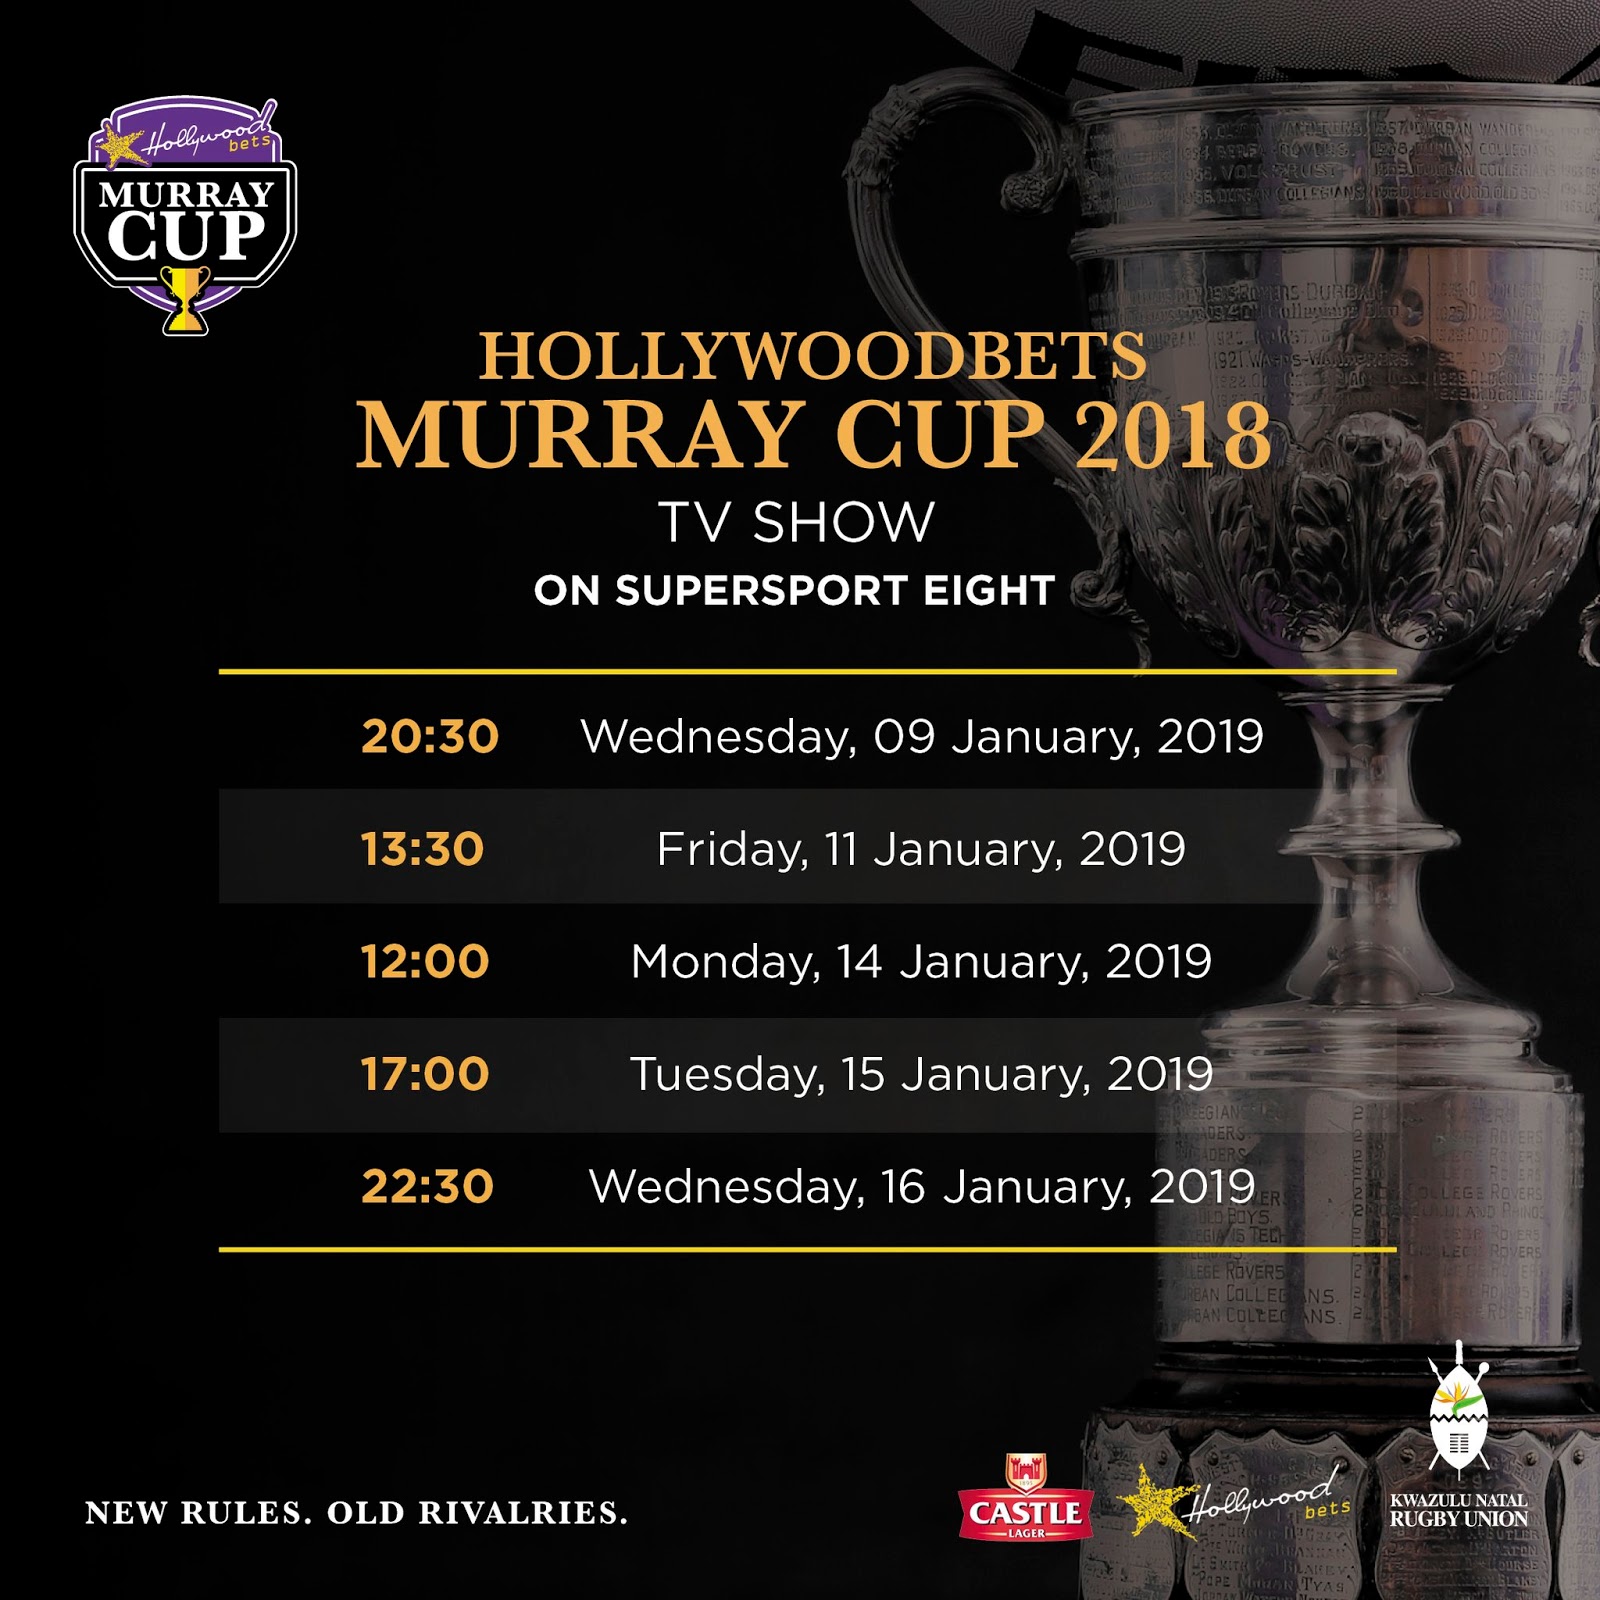 Hollywoodbets Murray Cup 2018